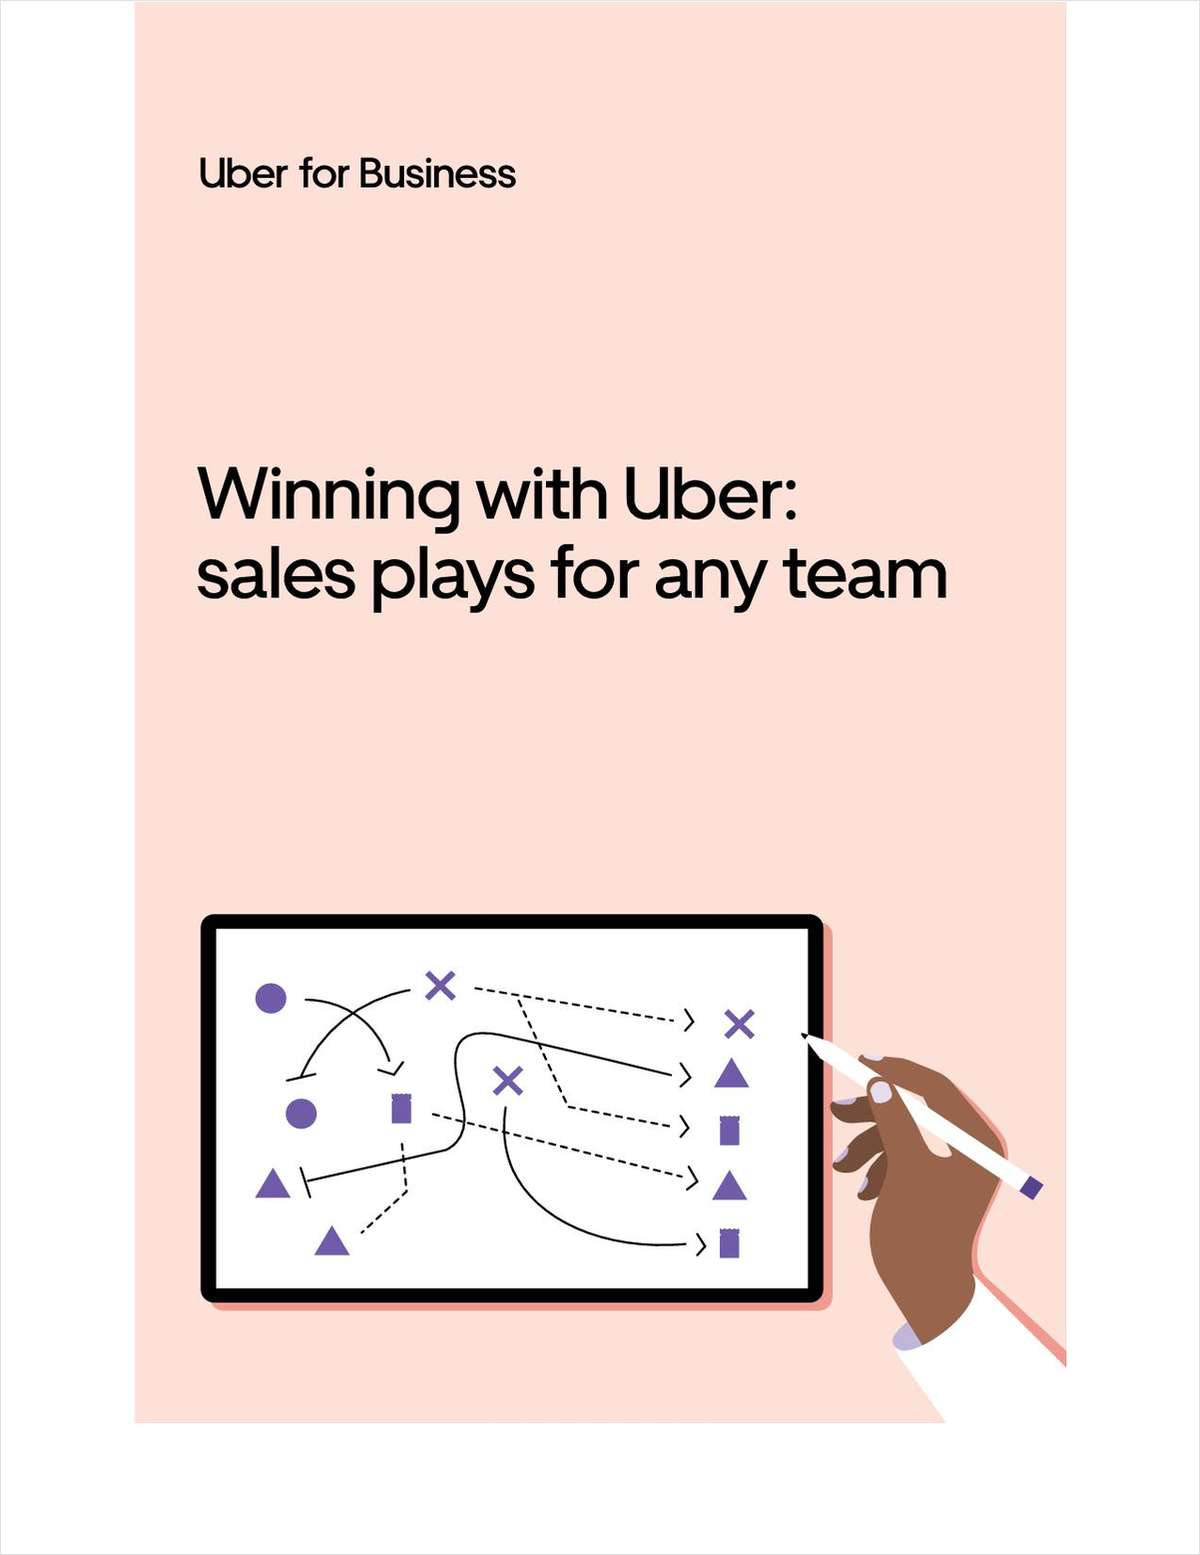 Winning with Uber: sales plays for any team